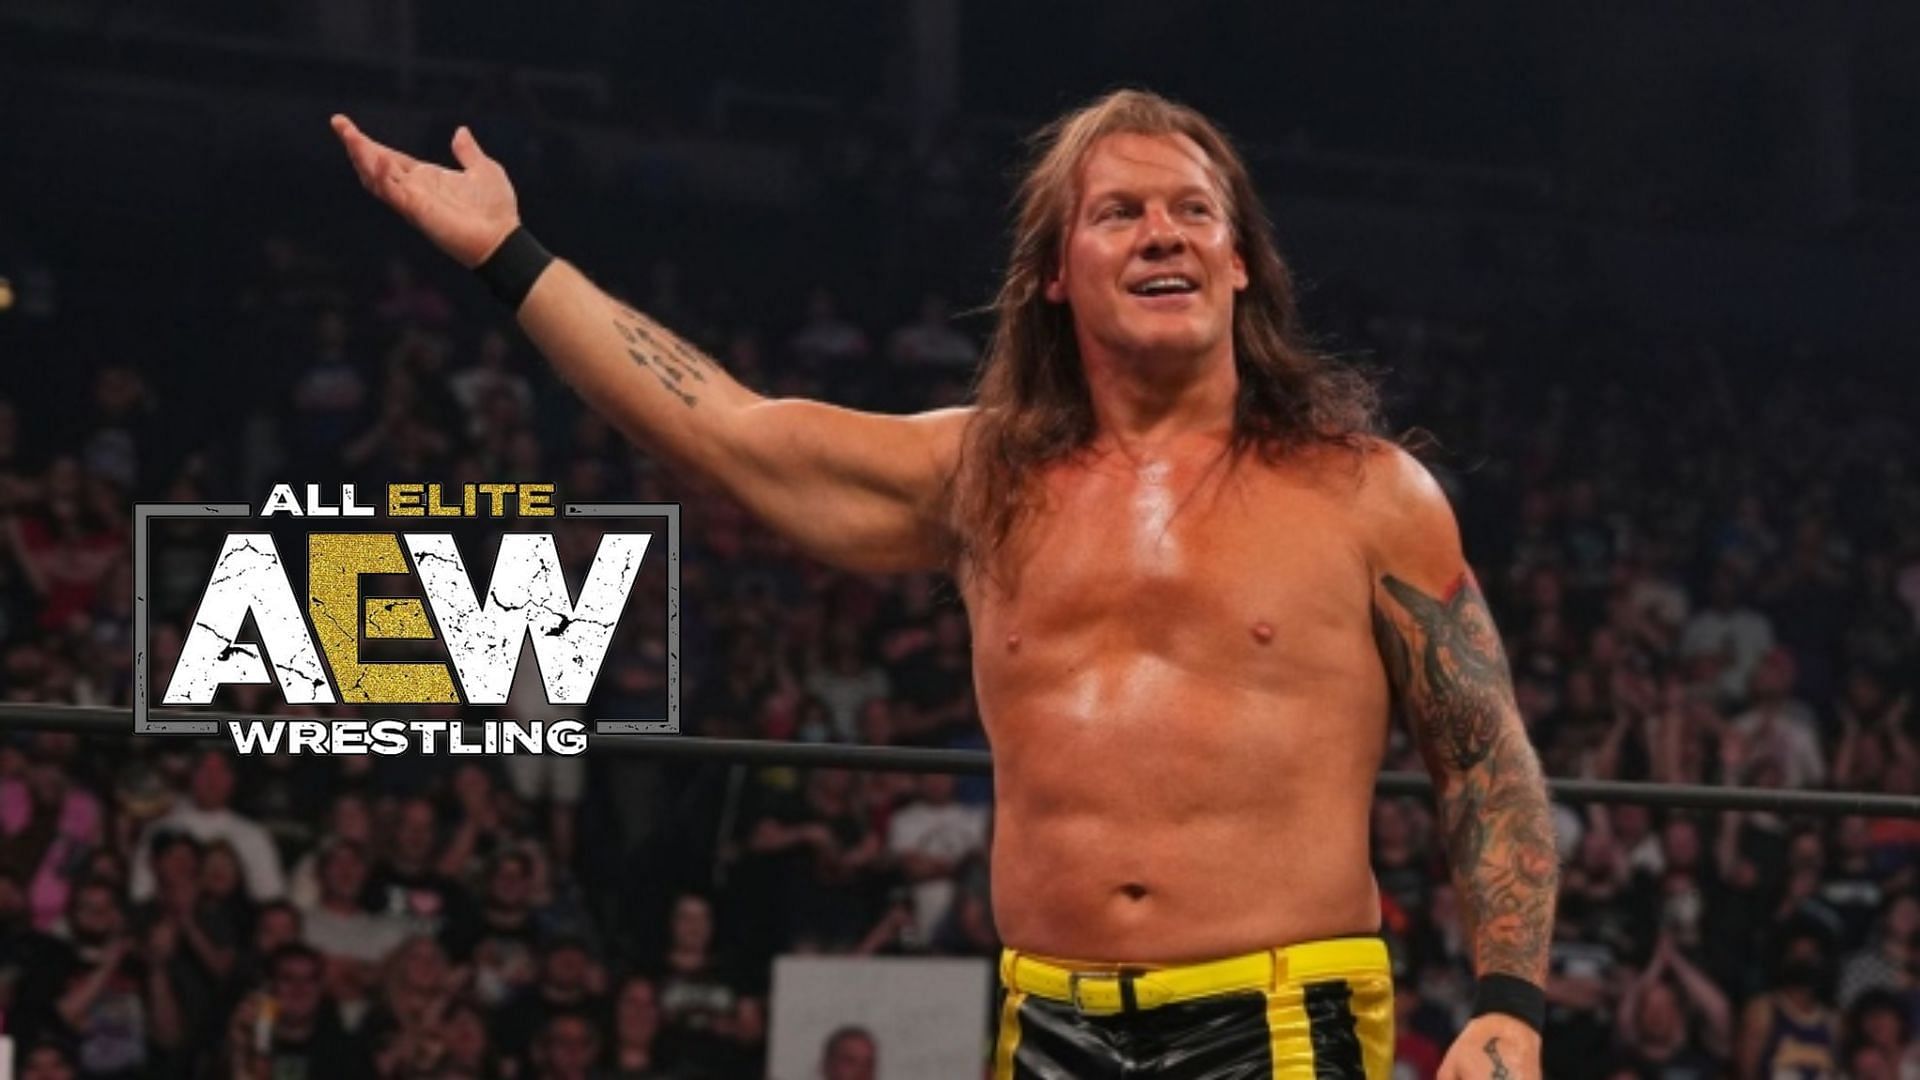 Chris Jericho is scheduled for the upcoming AEW pay-per-view, Full Gear.